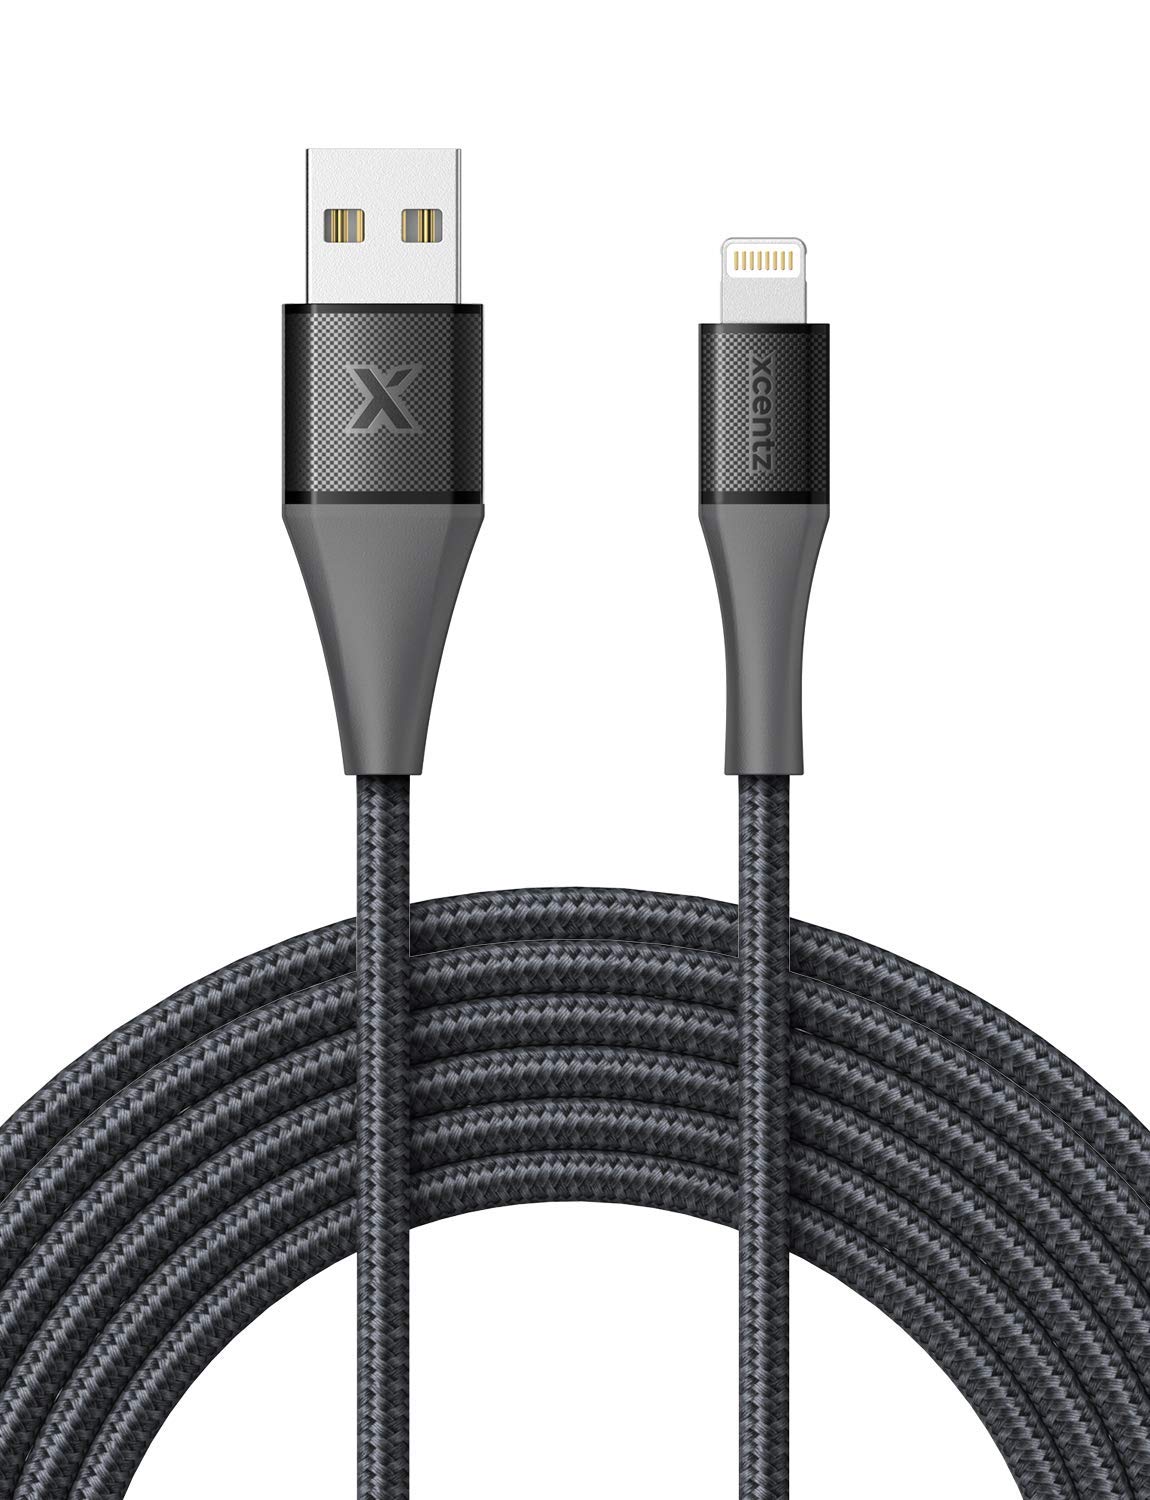 Book Cover Xcentz iPhone Charger 6ft, MFi Certified Lightning Cable, Braided Nylon Fast Charging iPhone Cable with Premium Metal Connector for iPhone 11/11 Pro/X/XS/XR/XS Max/8/7/6/5S, iPad Mini/Air, Black